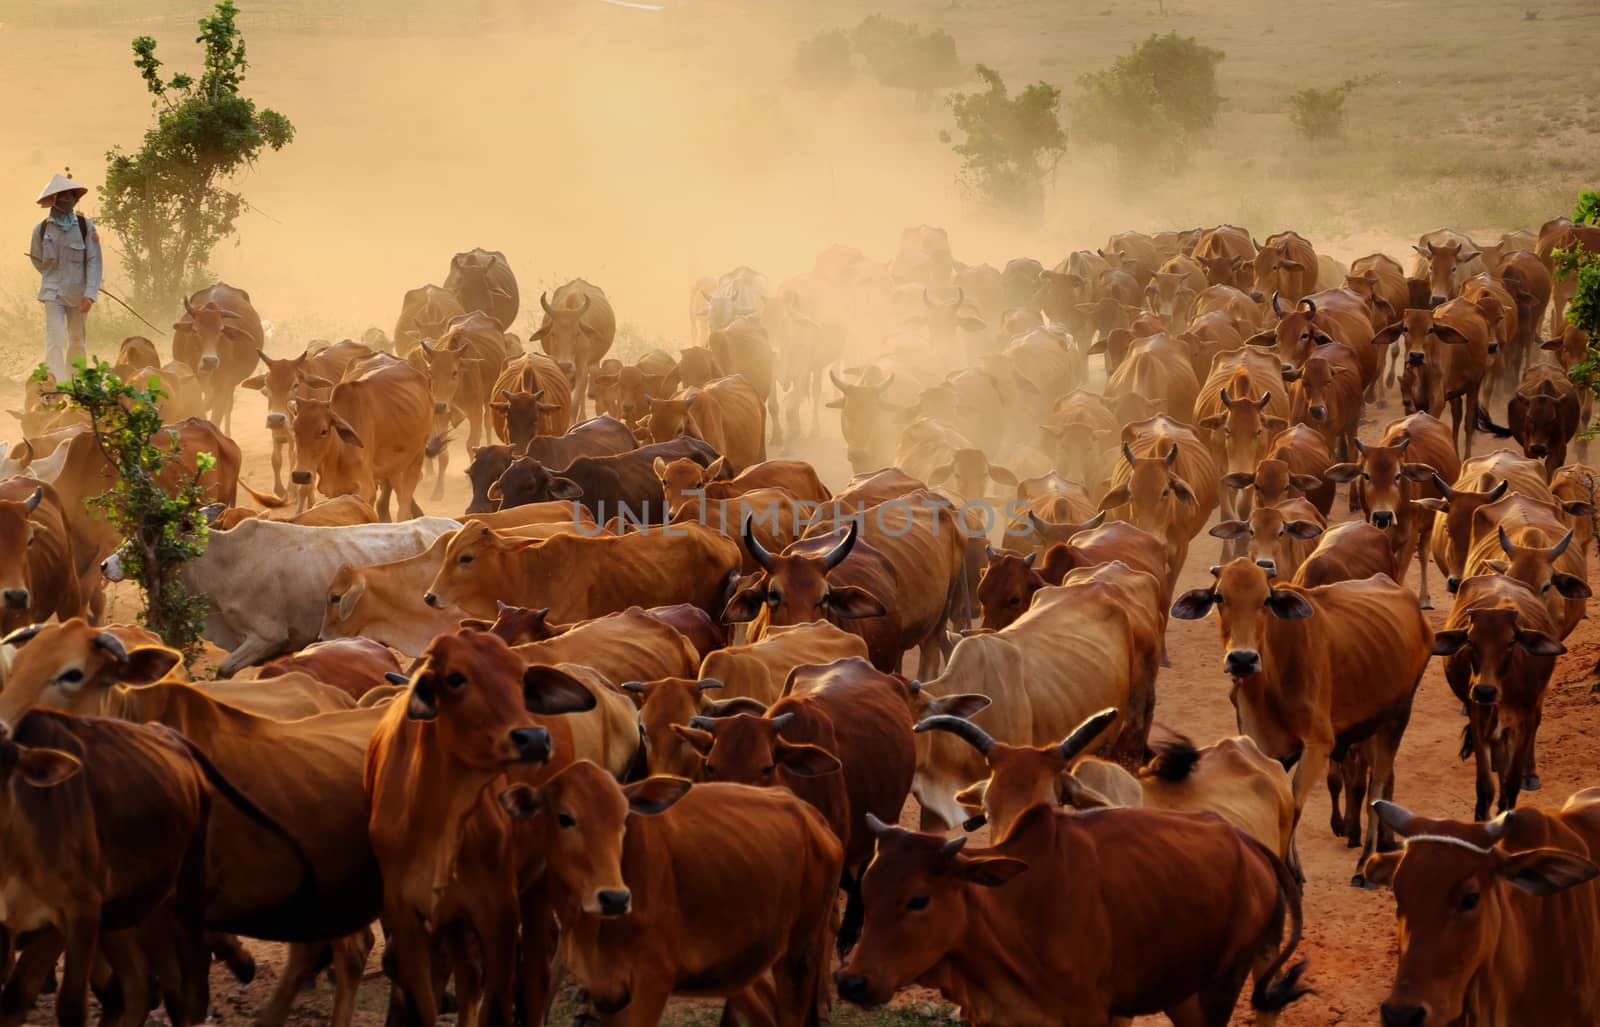 Amazing scene at Vietnam countryside in evening, cowboy herd cows move on meadow and make dust, livestock is a popular Vietnamese agriculture at Binh Thuan